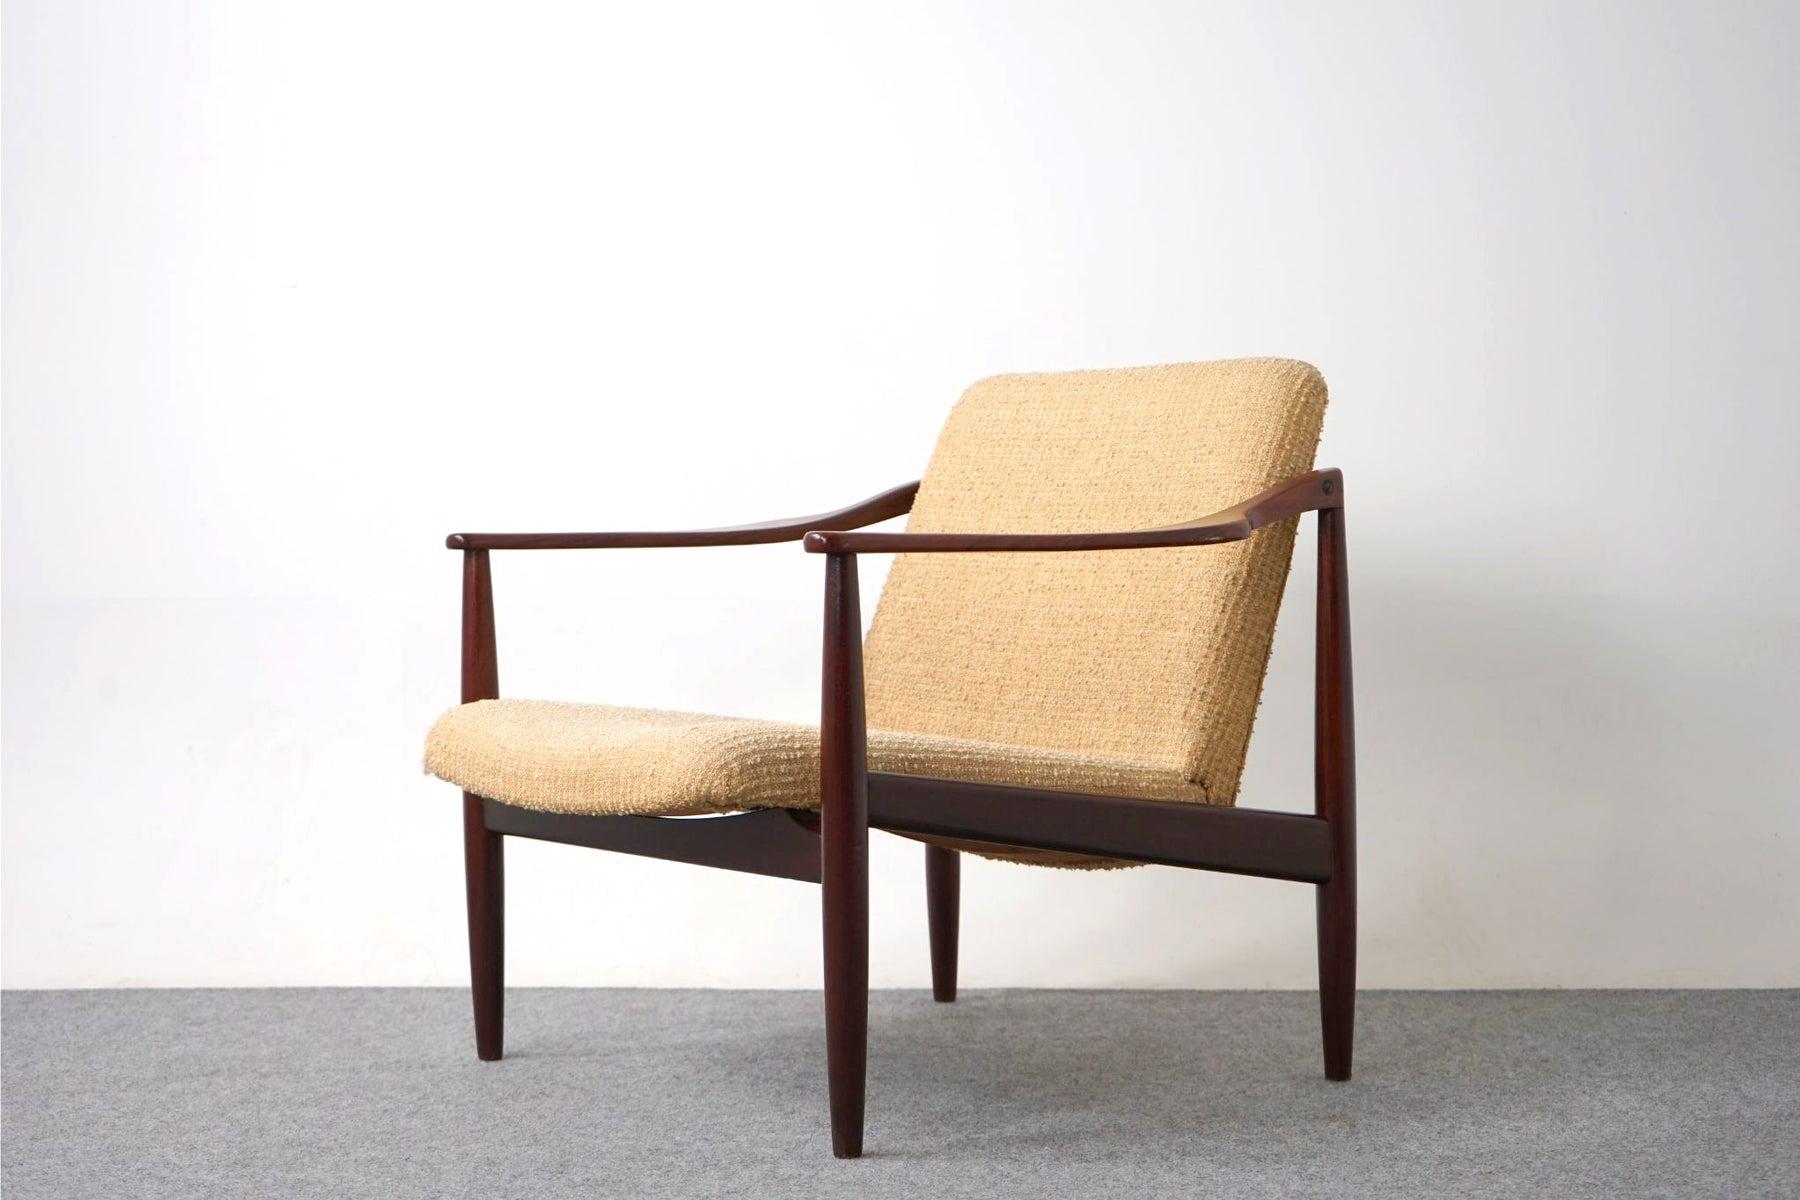 Teak Danish mid-century easy chair, circa 1960's. Sculpted teak frame with beautiful and smooth joinery. Clean modern solid wood frame with upholstered seat and back design is easy to combine with other furniture in your living room.

Unrestored